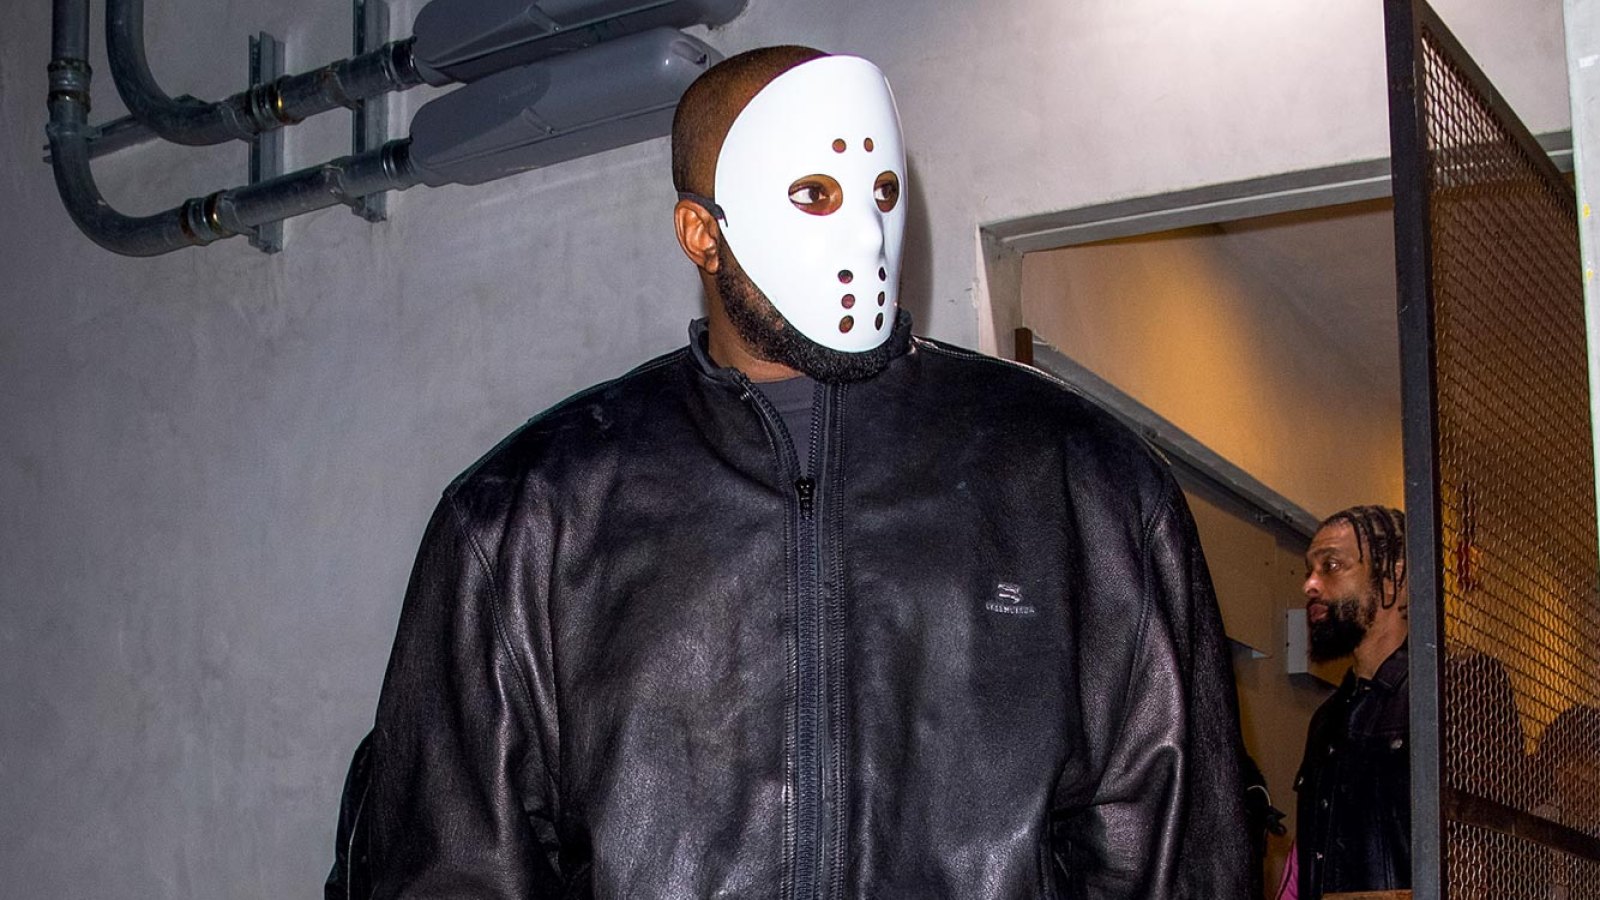 Kanye West Covers Face With Friday the 13th Mask Outside Son Saints Basketball Game